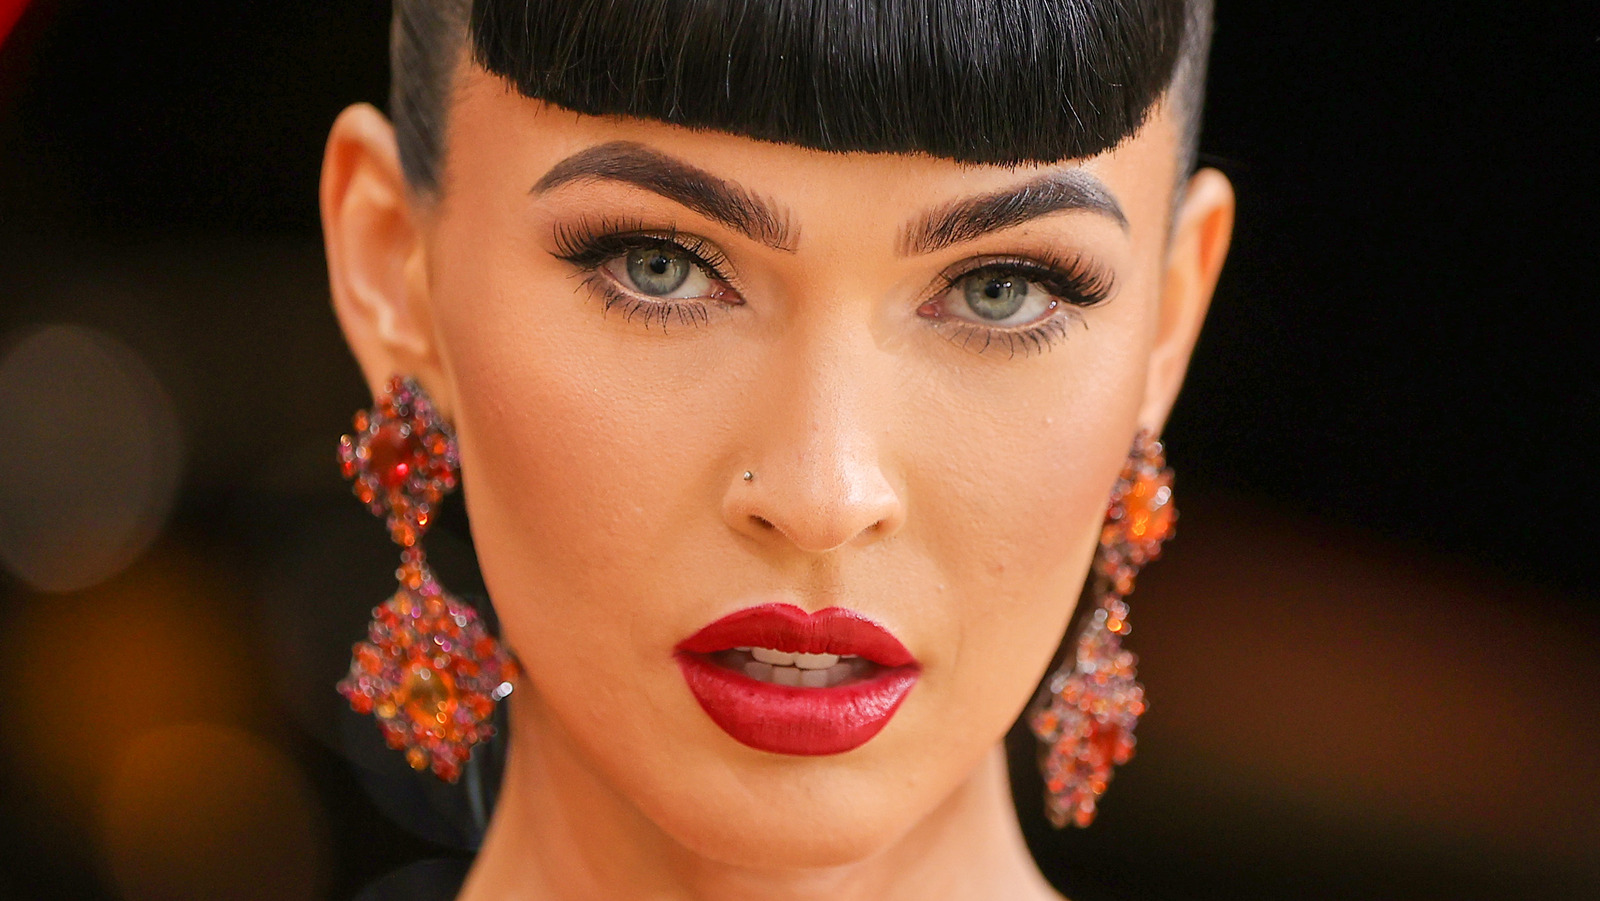 Megan Fox Makes A Startling Confession About Her Self Image - The List